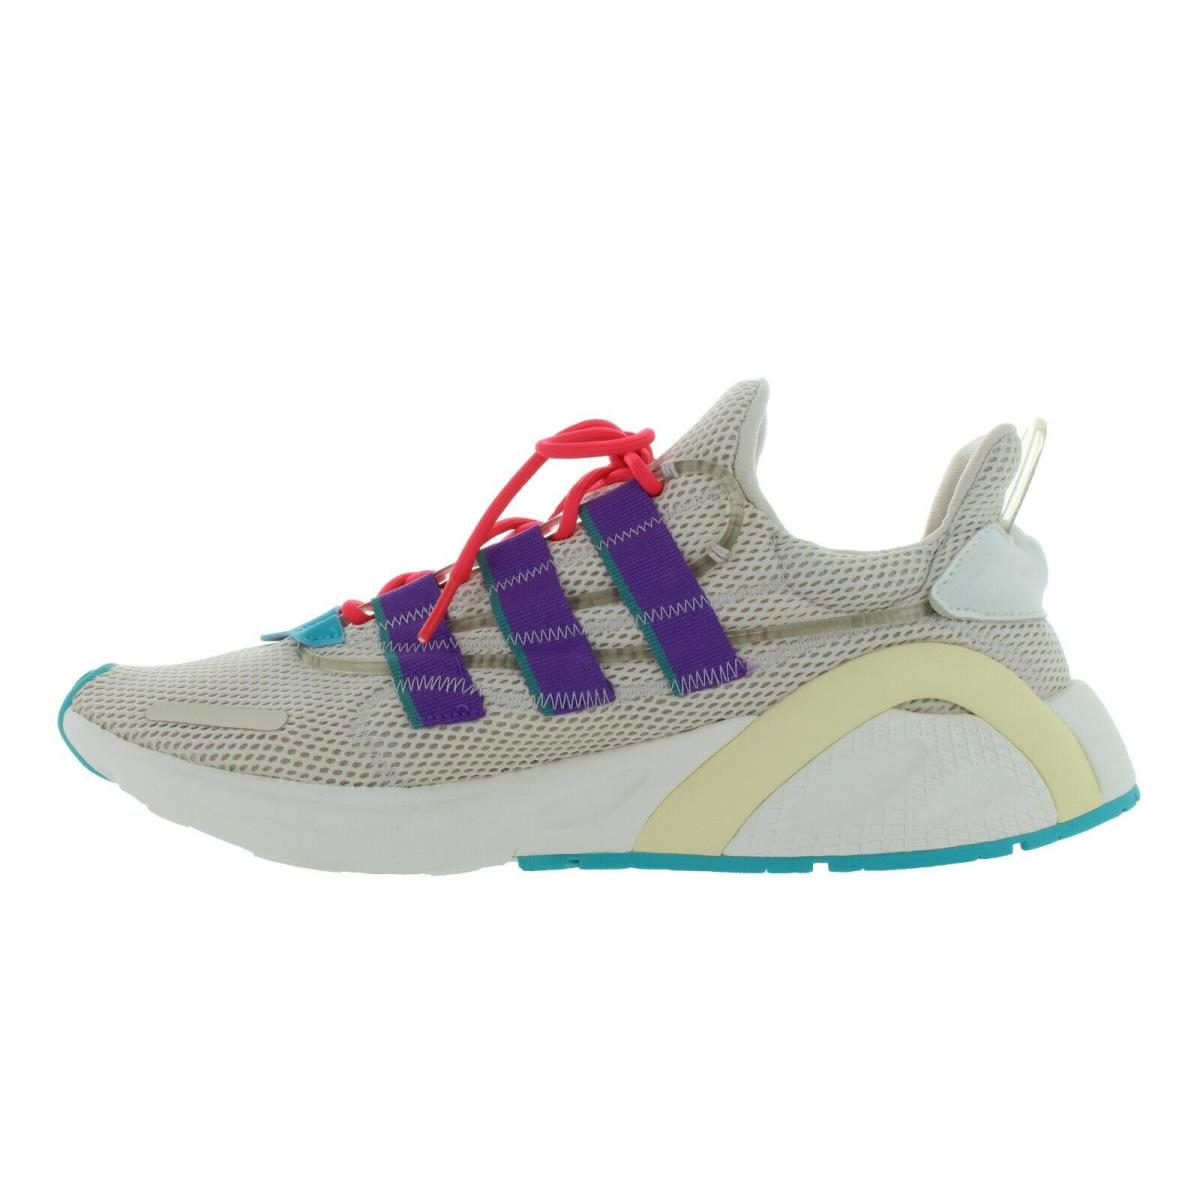 Adidas Men`s Originals Iconic Lxcon Clear Brown Running Shoes Size 11.5 - Clear Brown, Active Purple, Shock Red